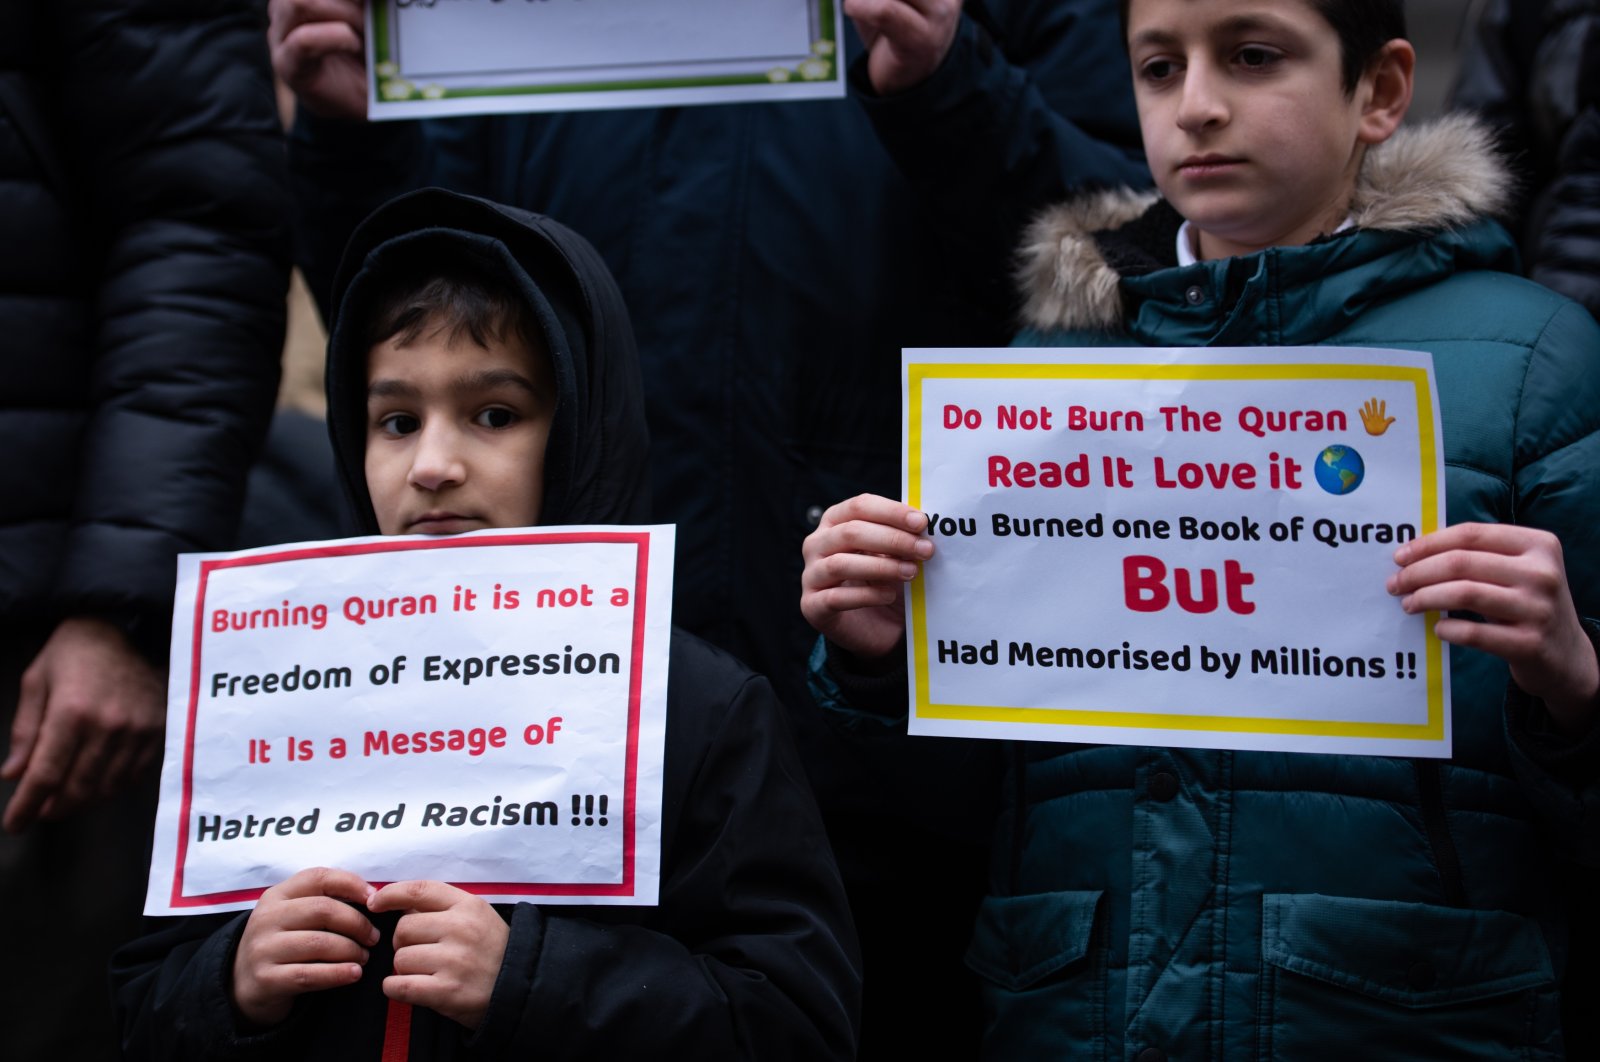 Young protestors hold placards during the demonstration against the Quran burning in Sweden, London, U.K., Jan. 28, 2023. (Getty Images Photo)